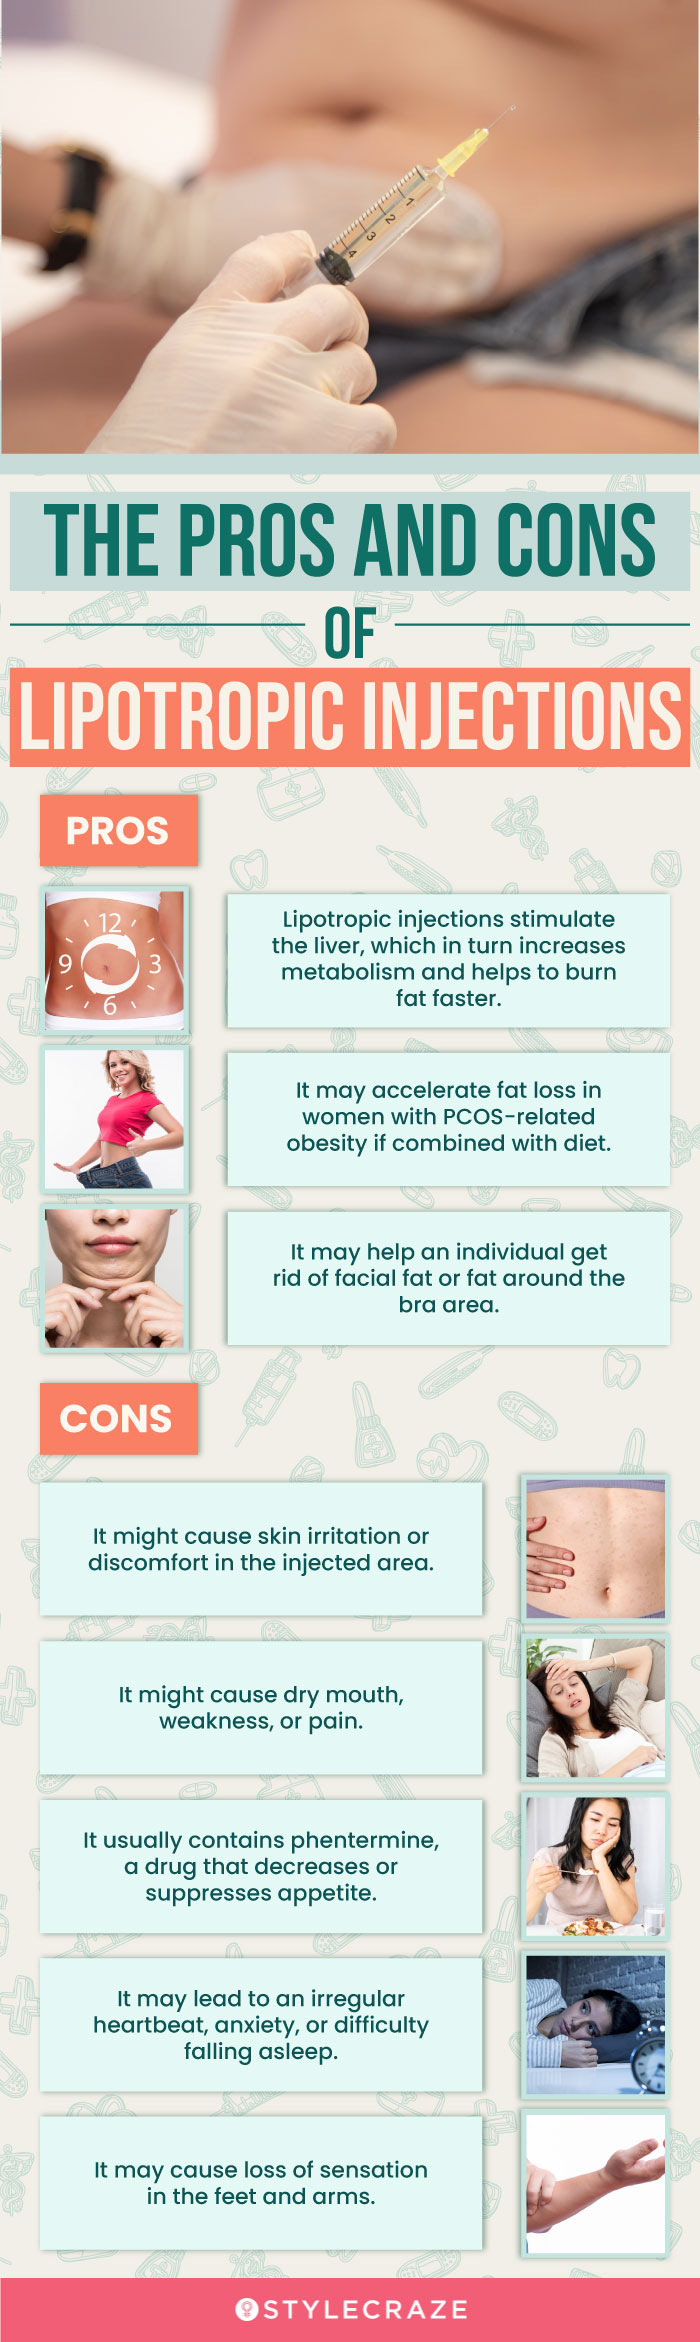 the pros and cons of lipotropic injections (infographic)